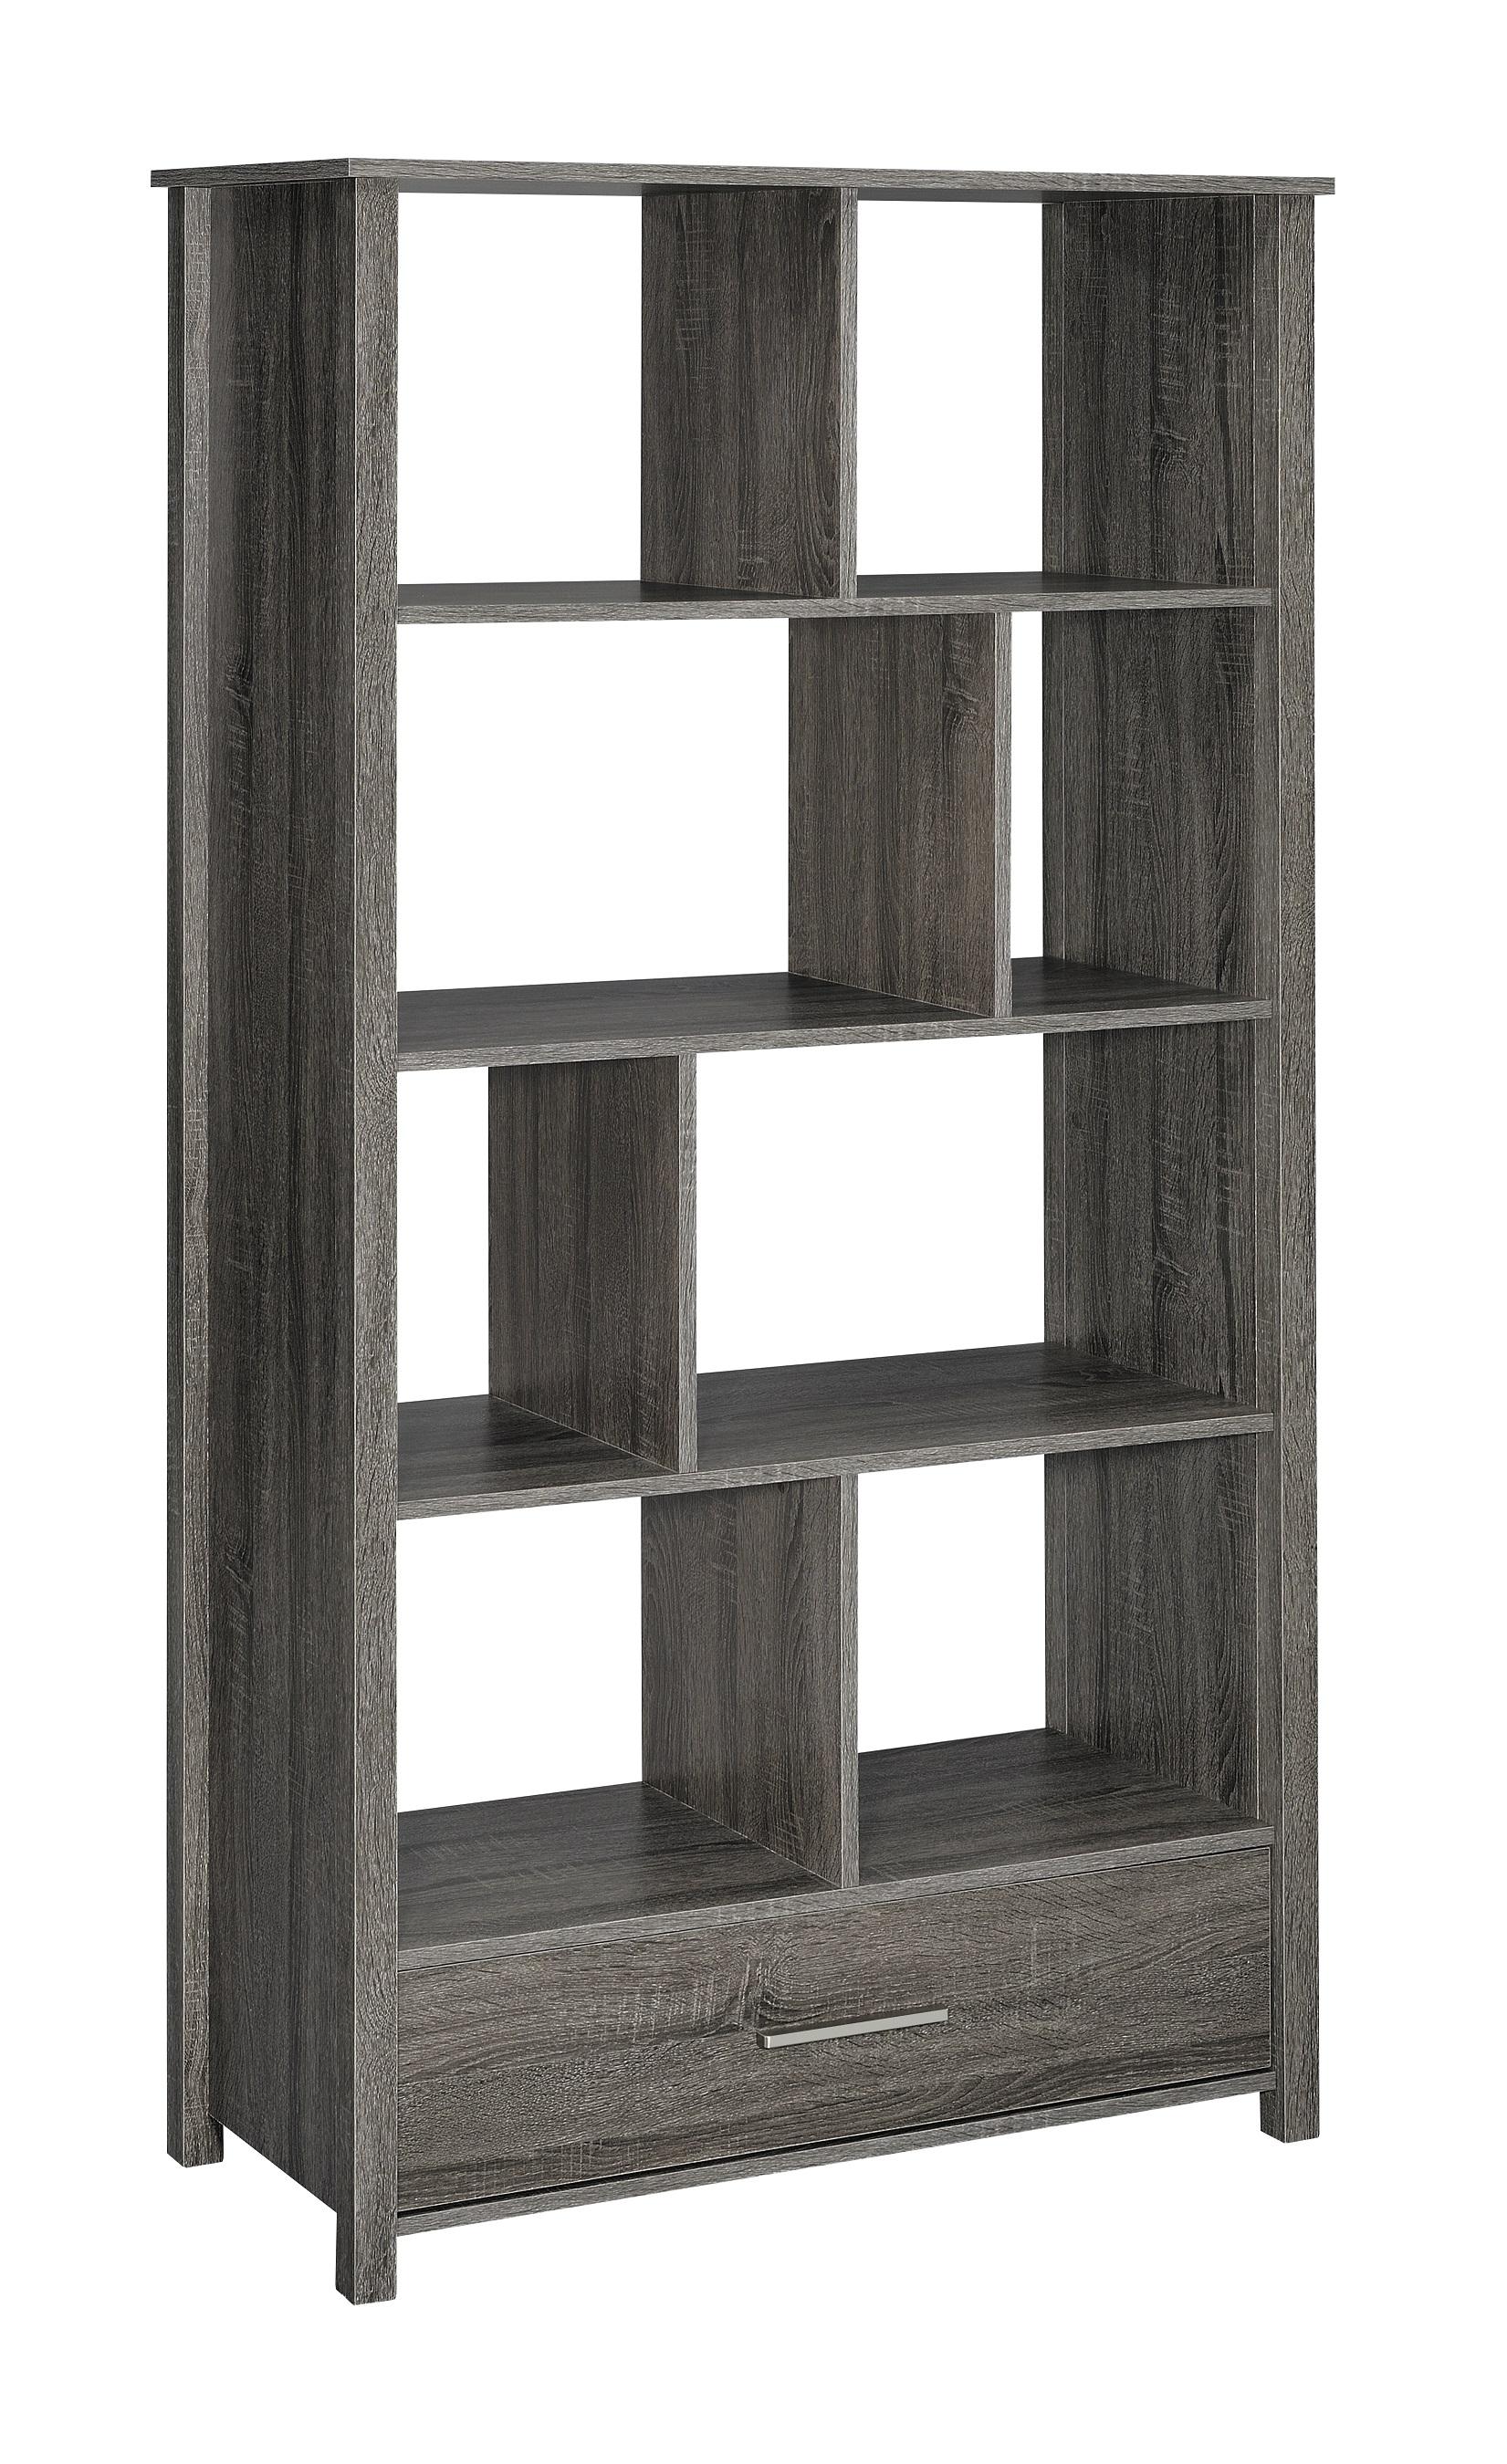 Contemporary Bookcase 801577 Dylan 801577 in Gray 